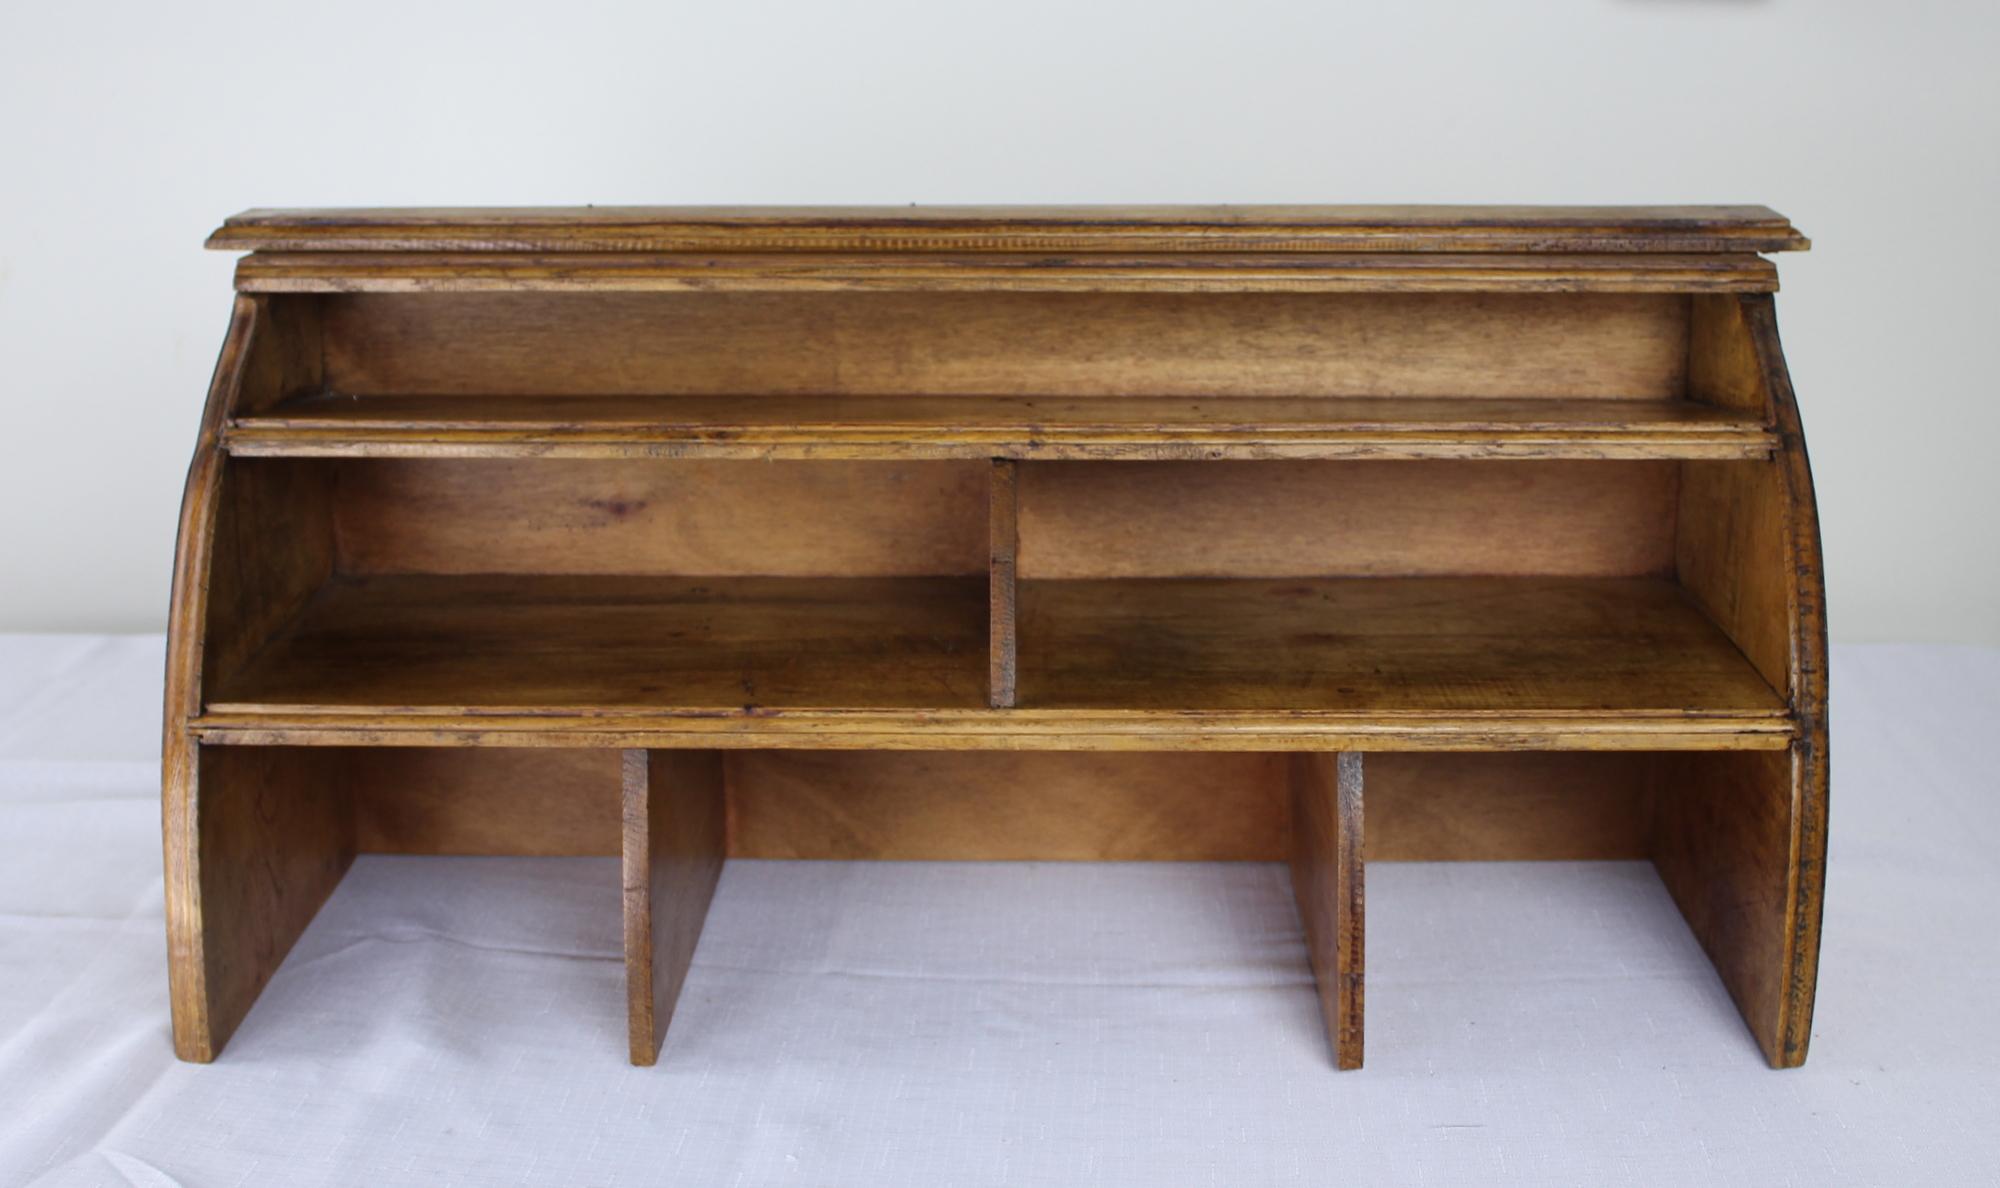 A beautifully made oak French desk organizer, circa 1960. Fine glowing wood and elegant silhouette. Would look smart atop one of our antique writing tables.